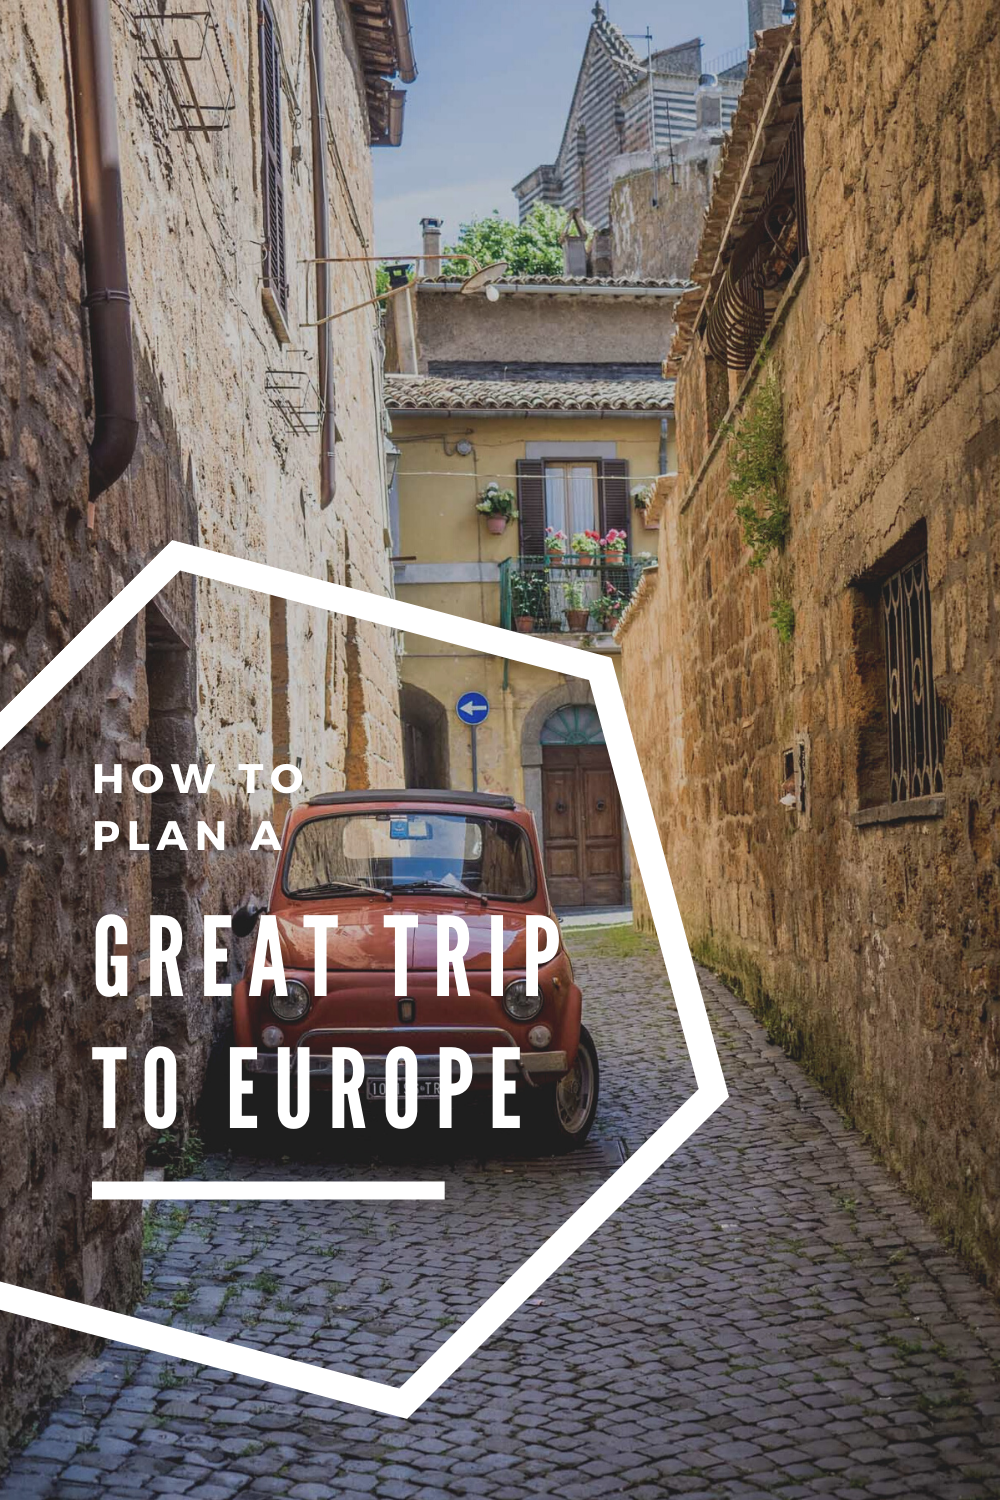 How to Plan a Great Trip to Europe